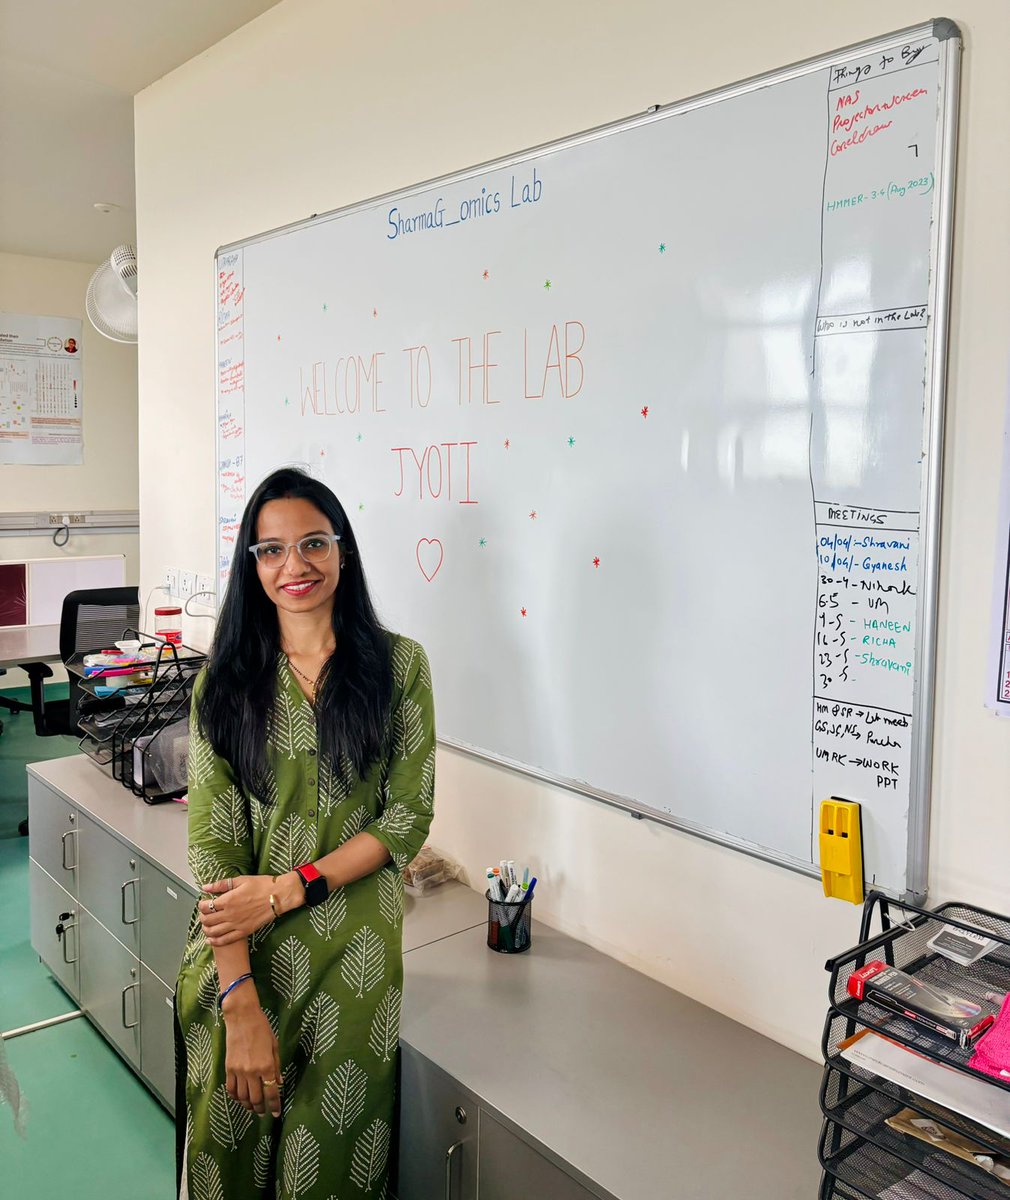 Welcoming Dr. Jyoti Rani @sharmajyoti829, an Institute Post-Doctoral Fellow (IITH-IPDF) in @omics_lab! With a PhD in Bioinformatics from Delhi University, we're thrilled to have her expertise enriching our team. Here's to new collaborations ahead!
@IITHyderabad @iith_src